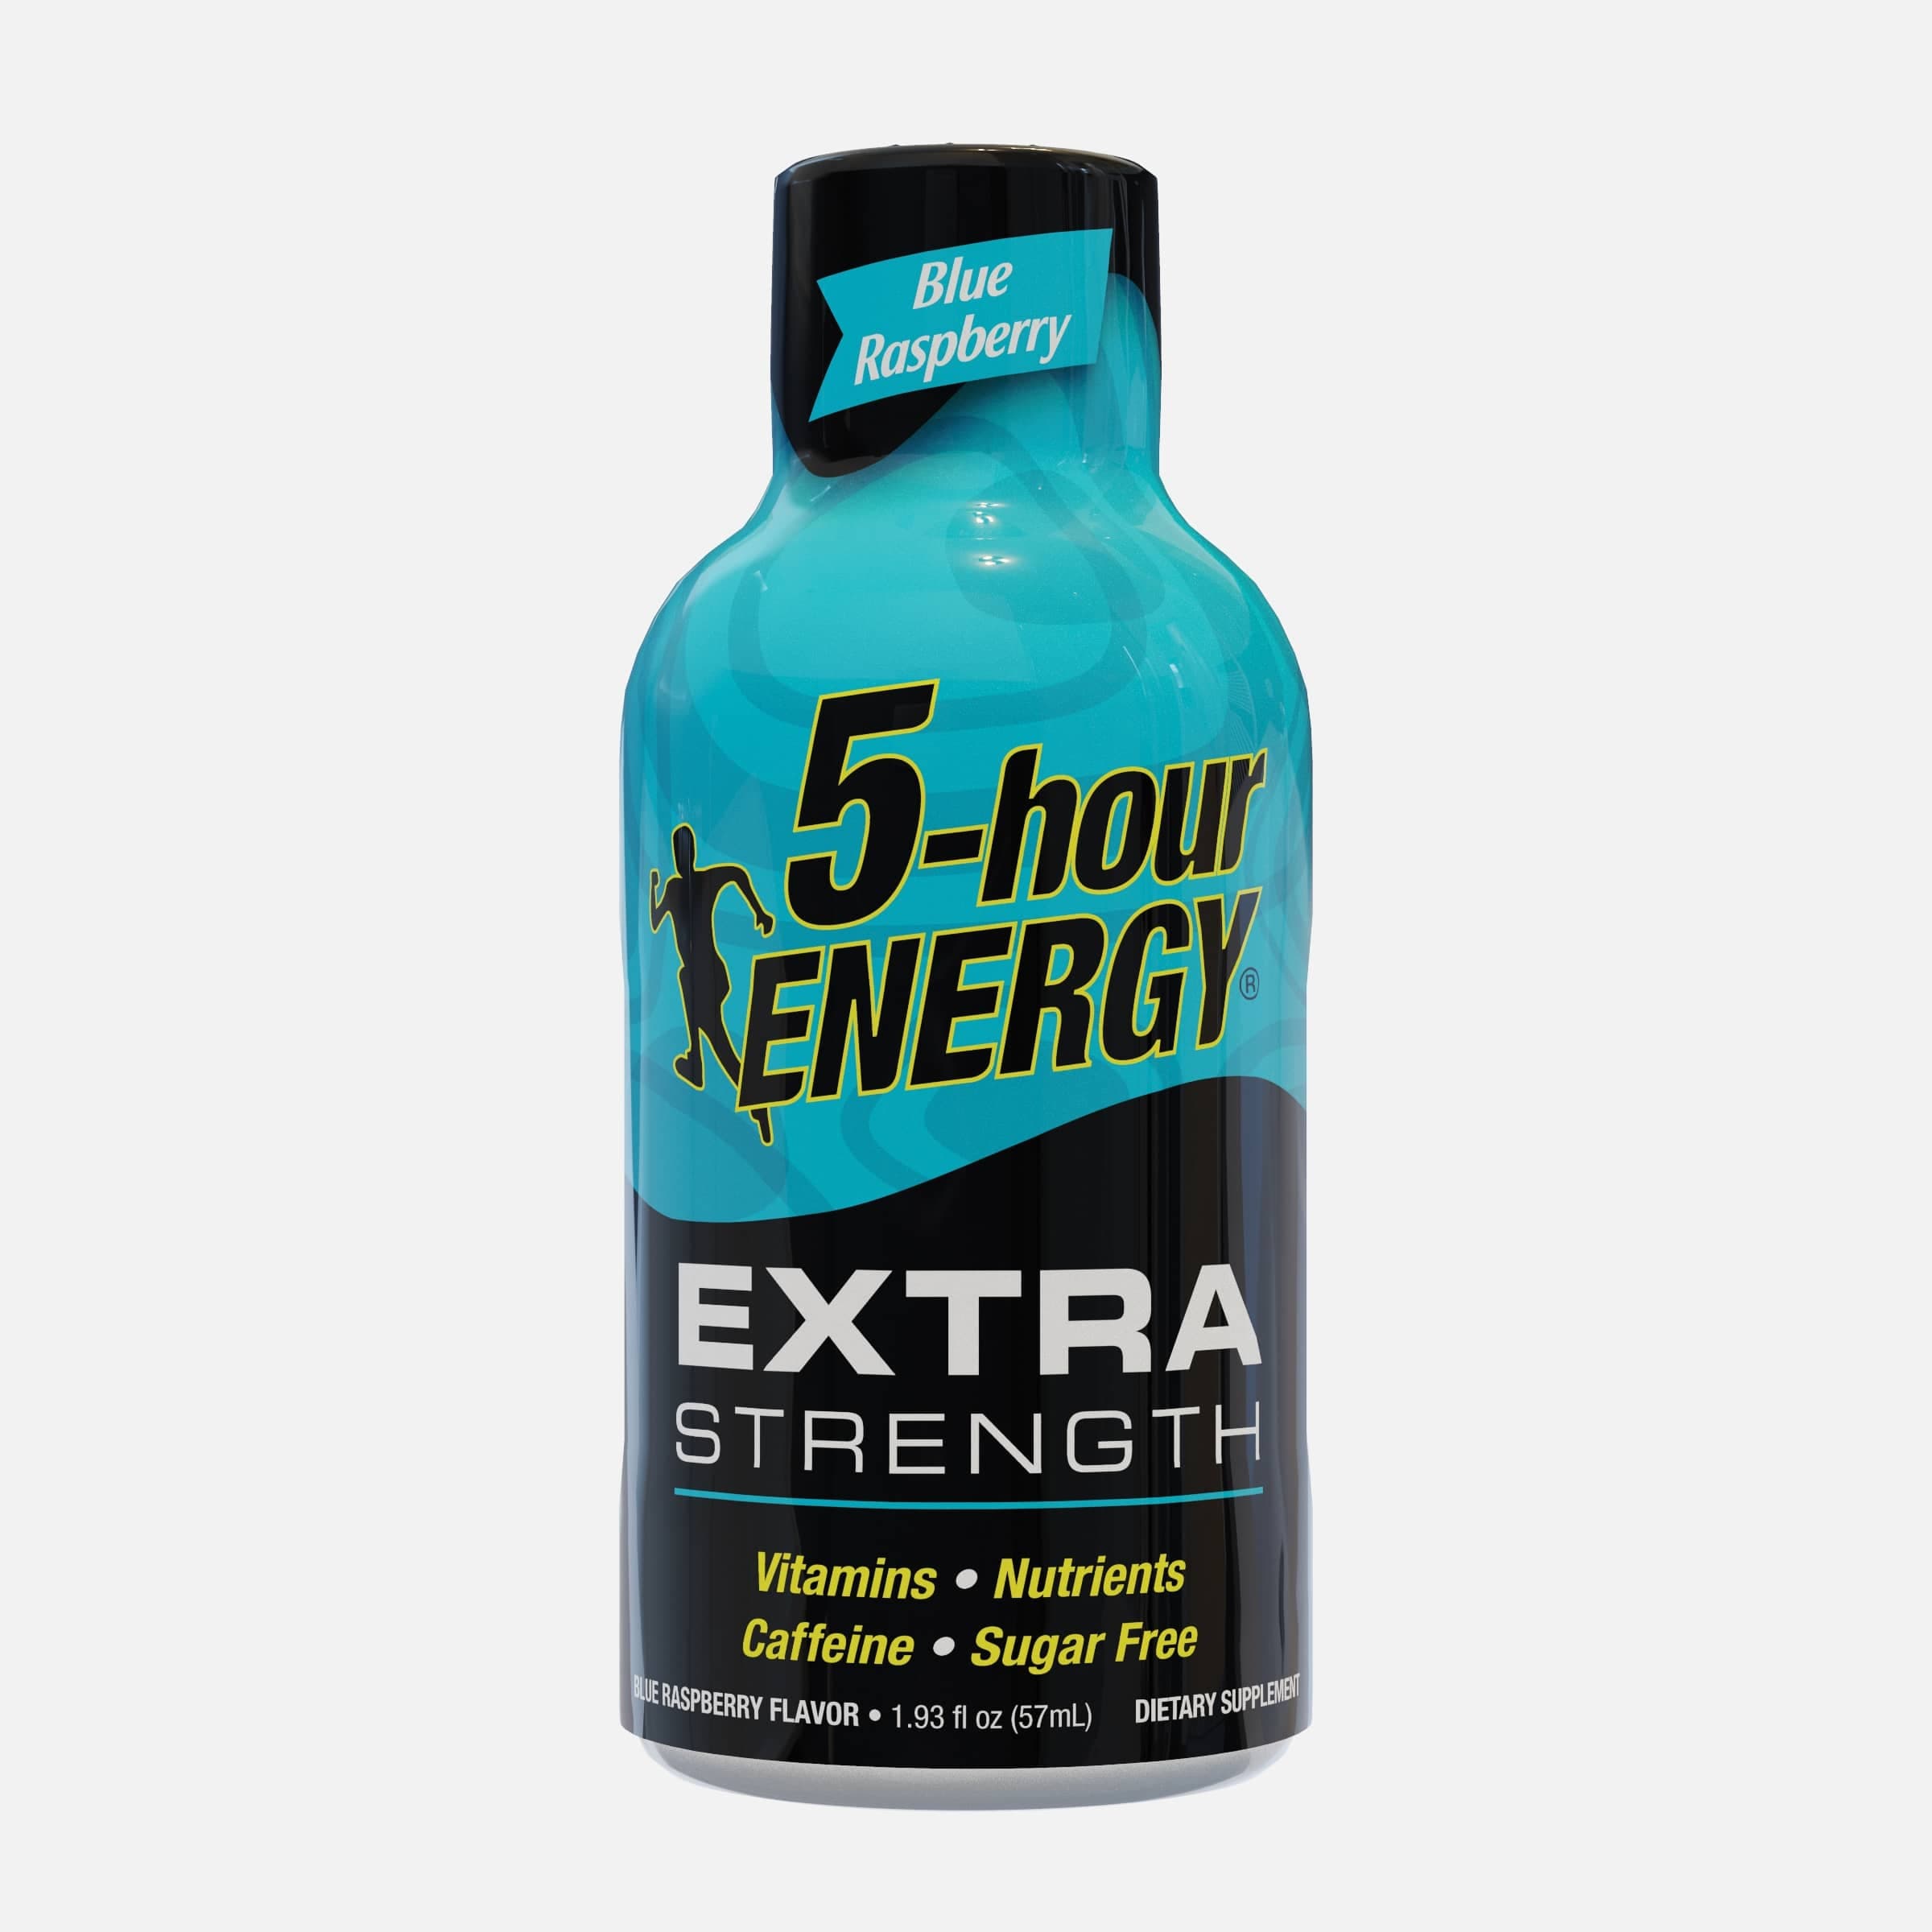 A single 5-hour extra strength energy shot in blue raspberry flavor.